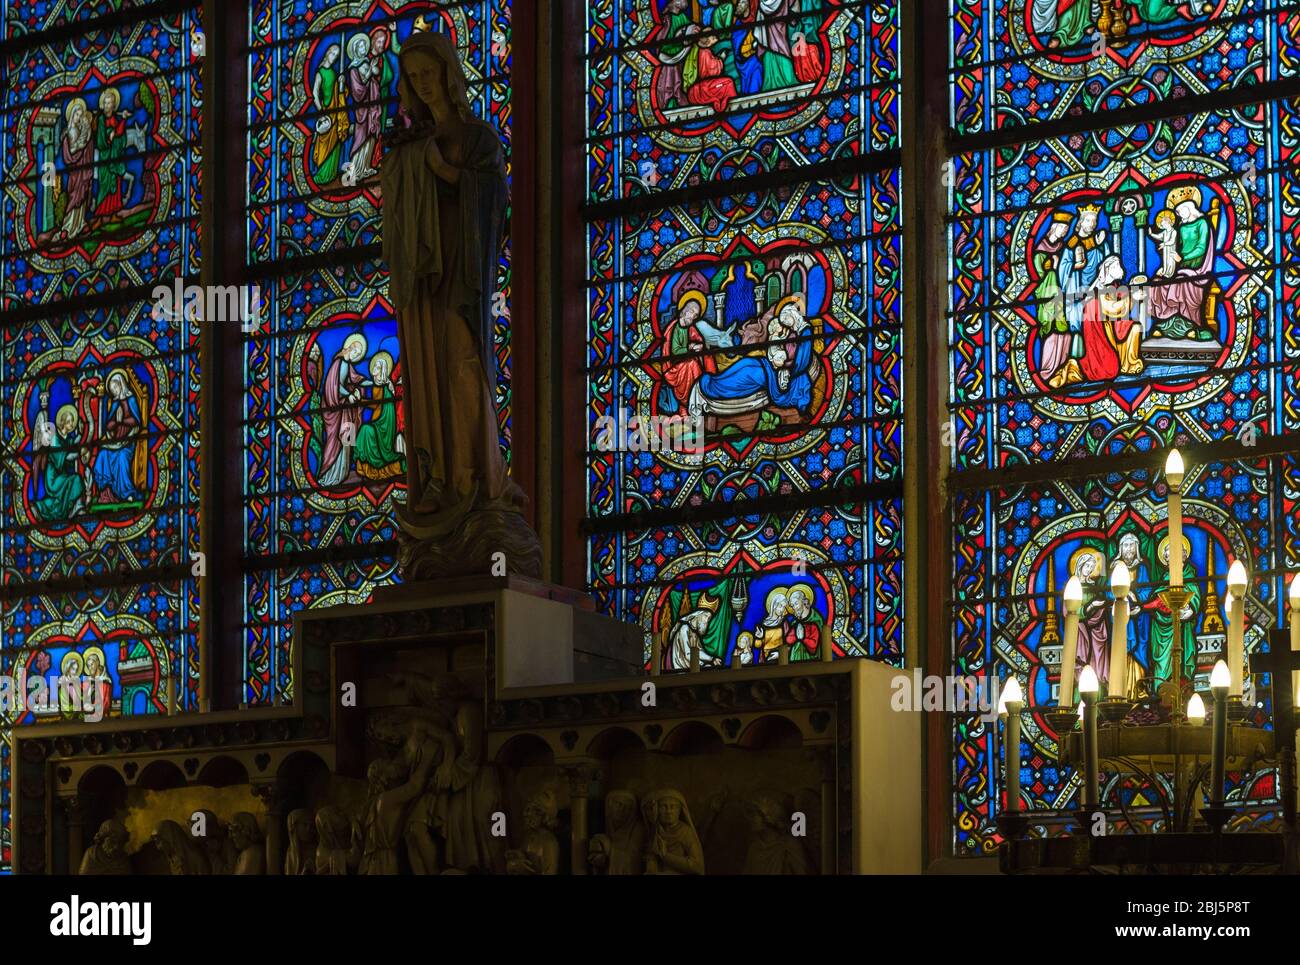 Stained glass in the catholic cathedral Notre-Dame de Paris. Built in French Gothic architecture, and it is among the largest and most well-known chur Stock Photo